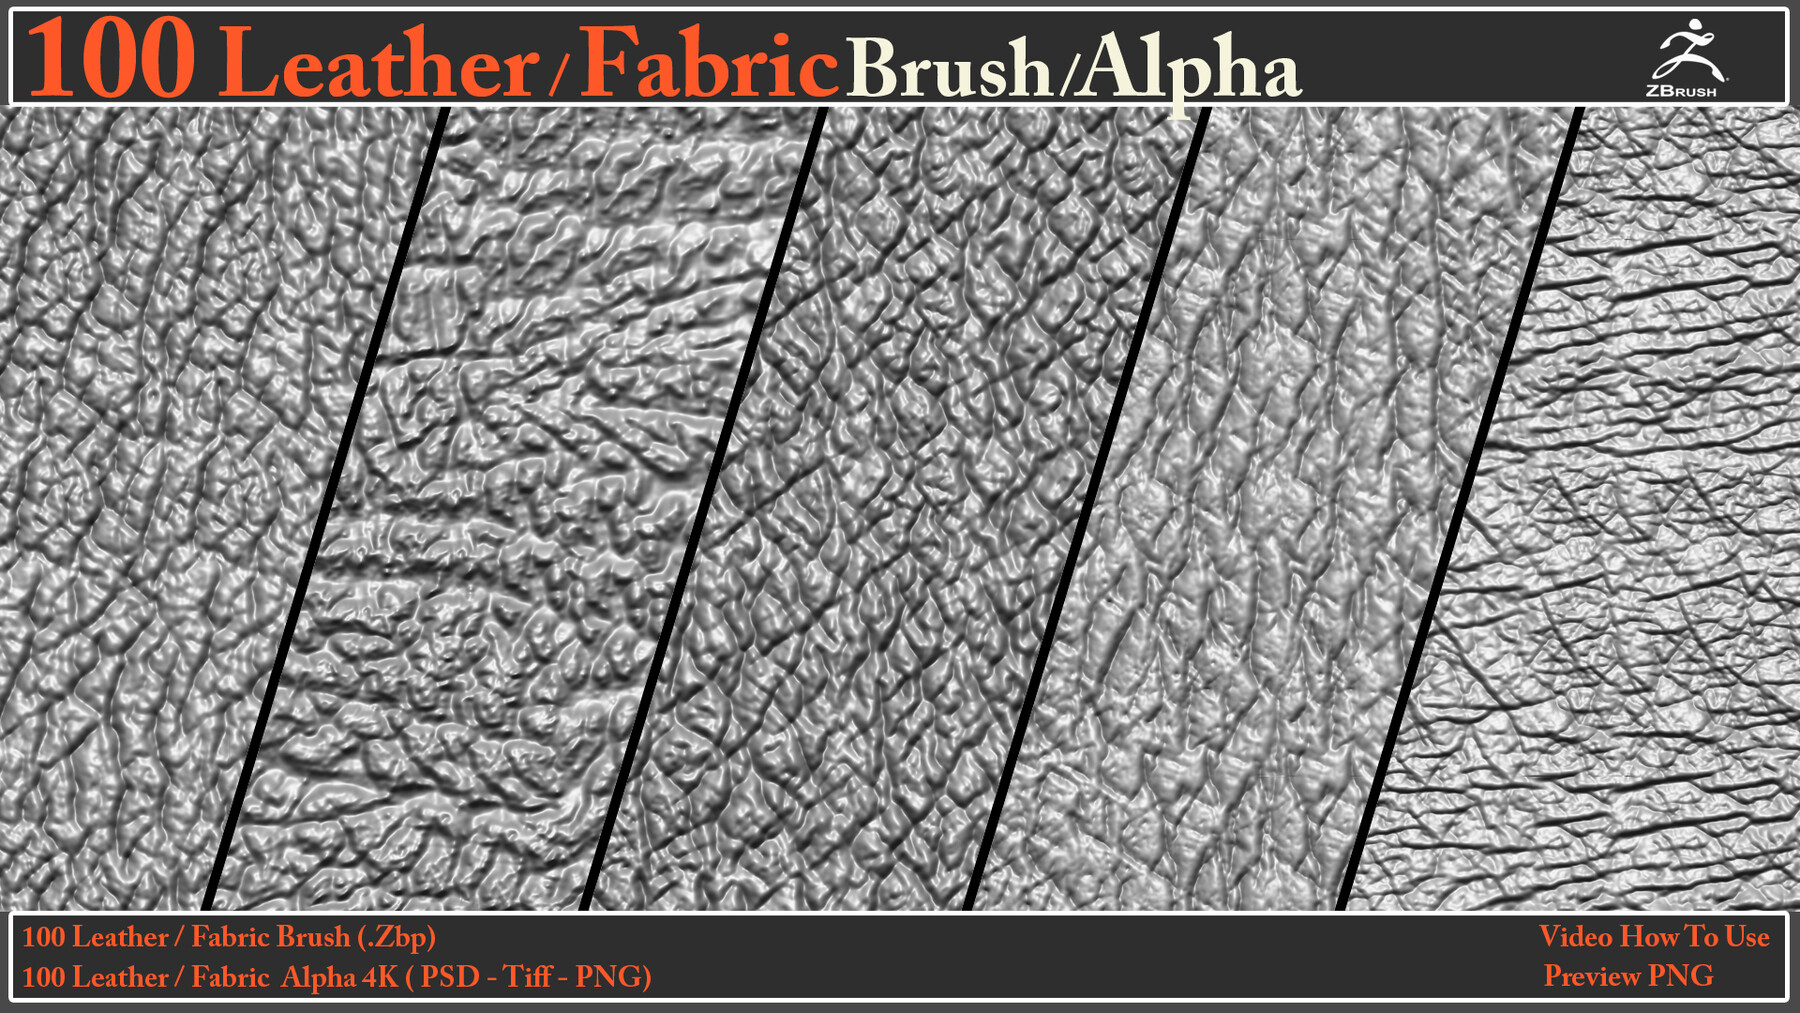 ArtStation - 100 Leather & Fabric Brush/Alpha + Video How To Use